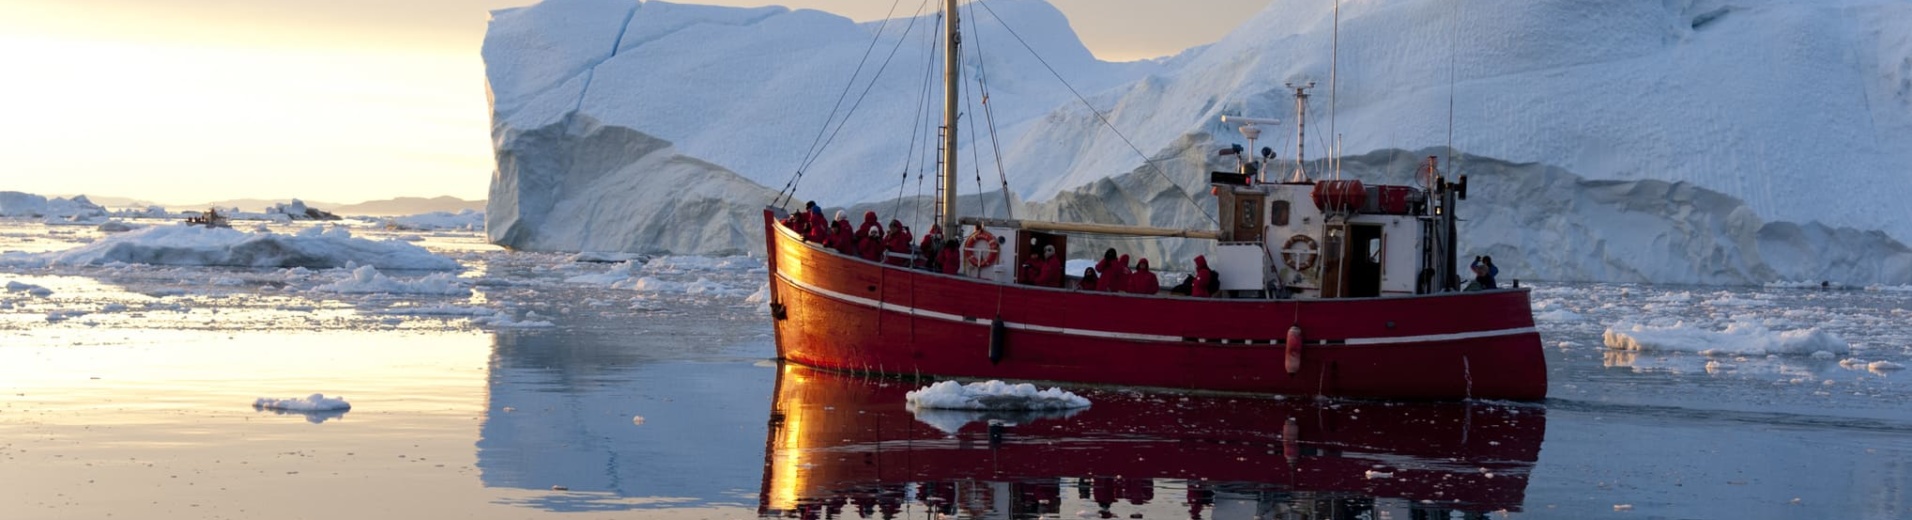 places visit greenland